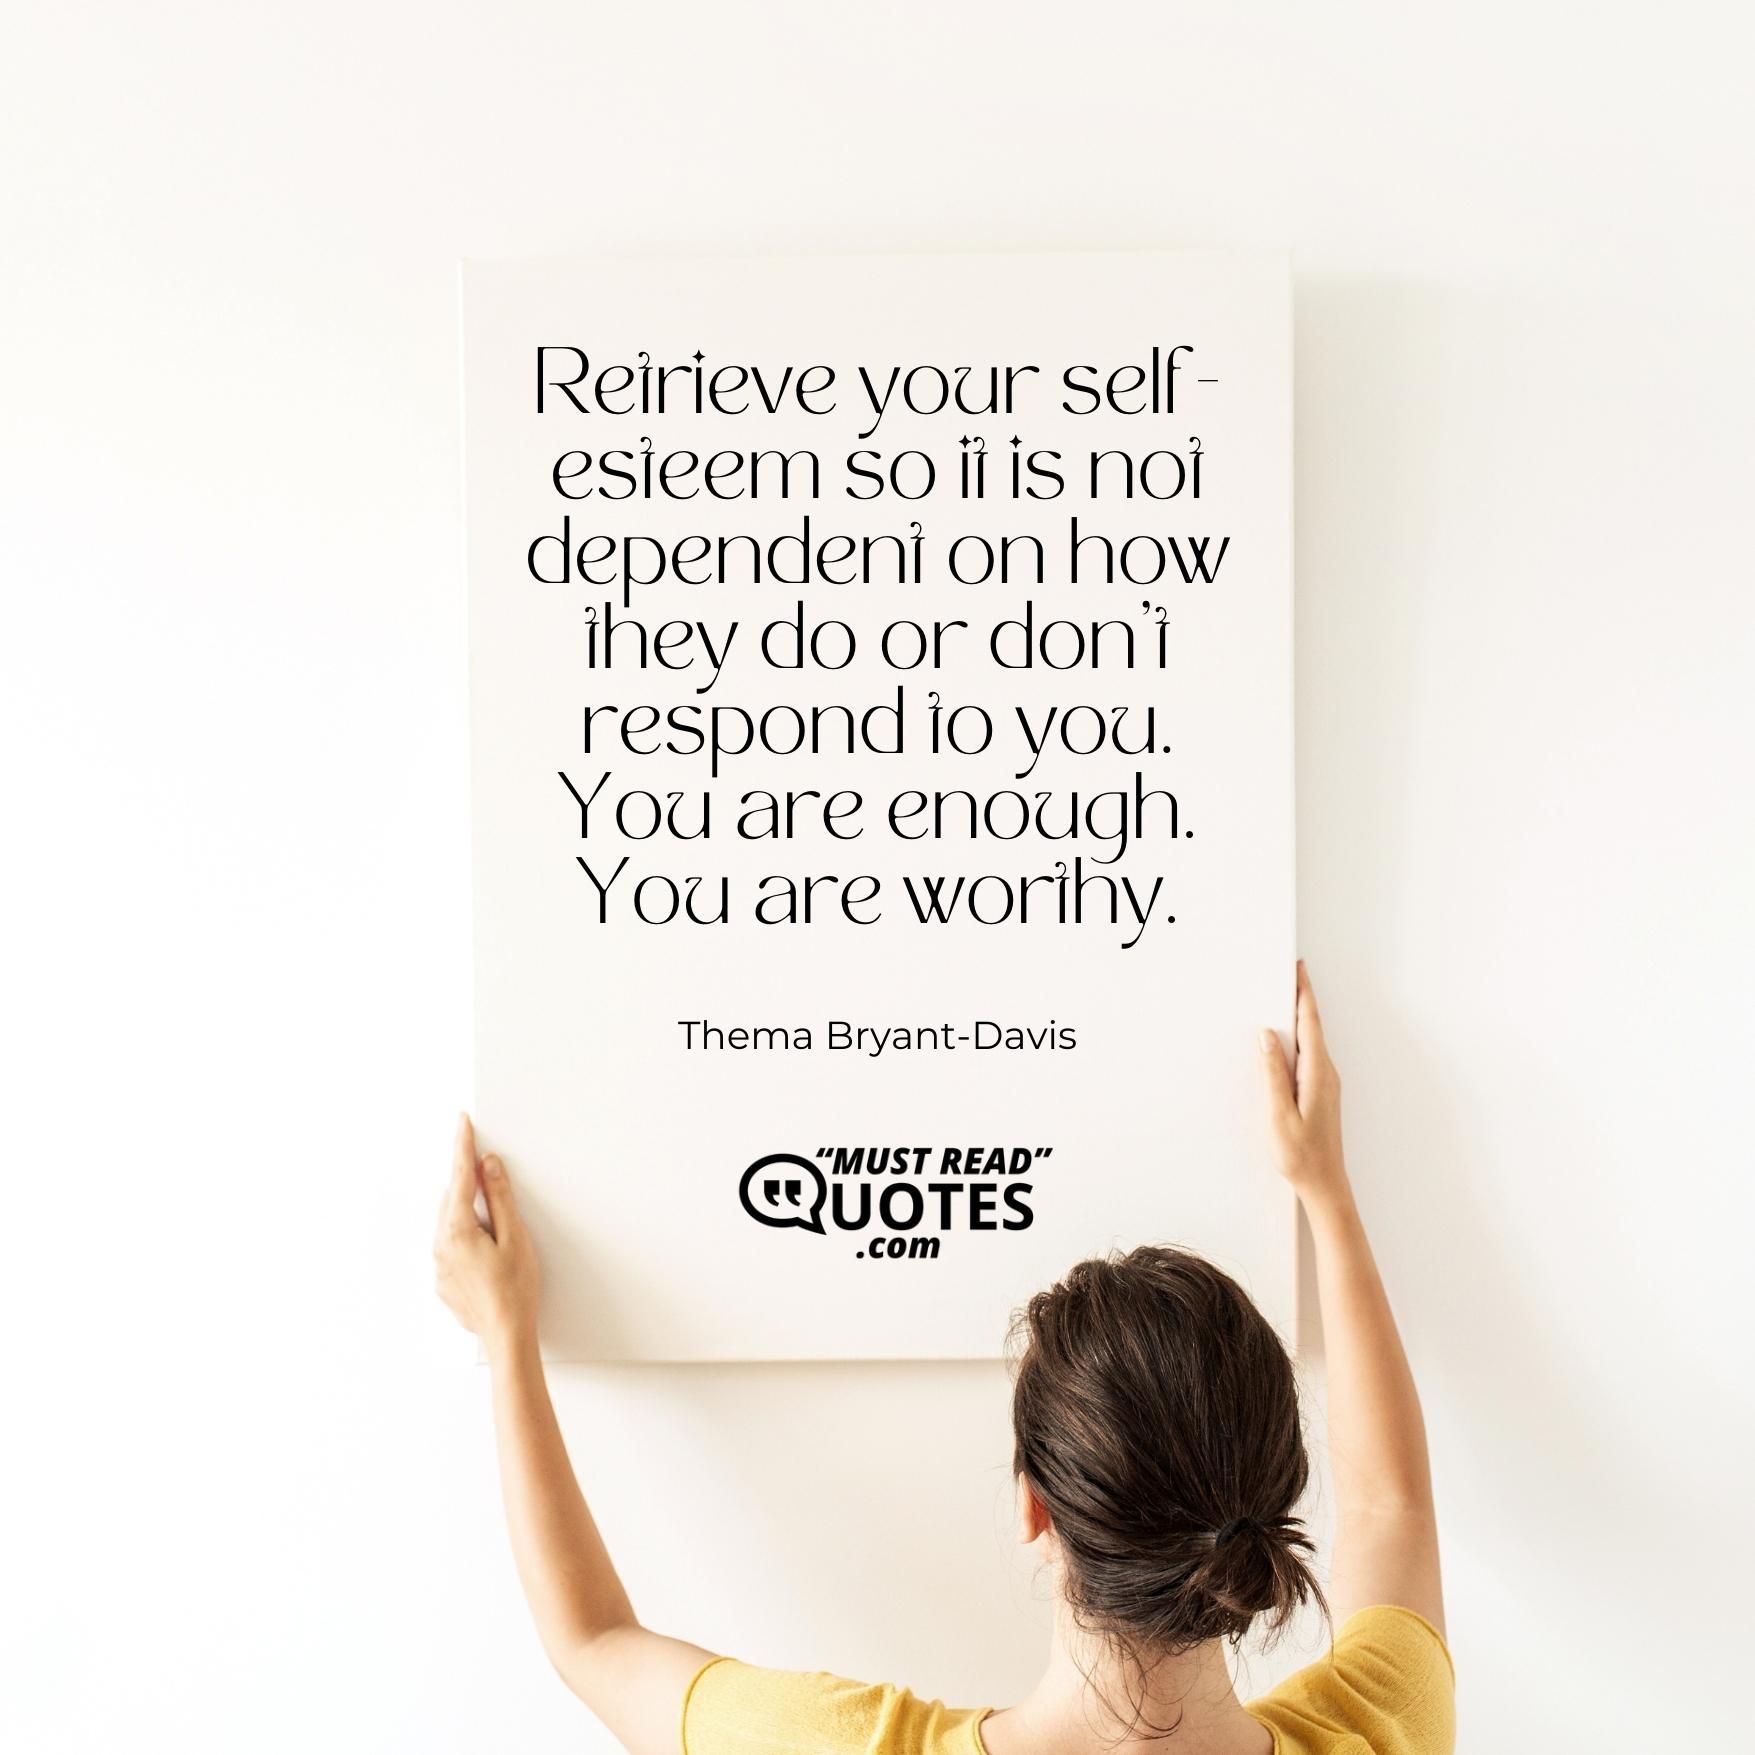 Retrieve your self-esteem so it is not dependent on how they do or don’t respond to you. You are enough. You are worthy.